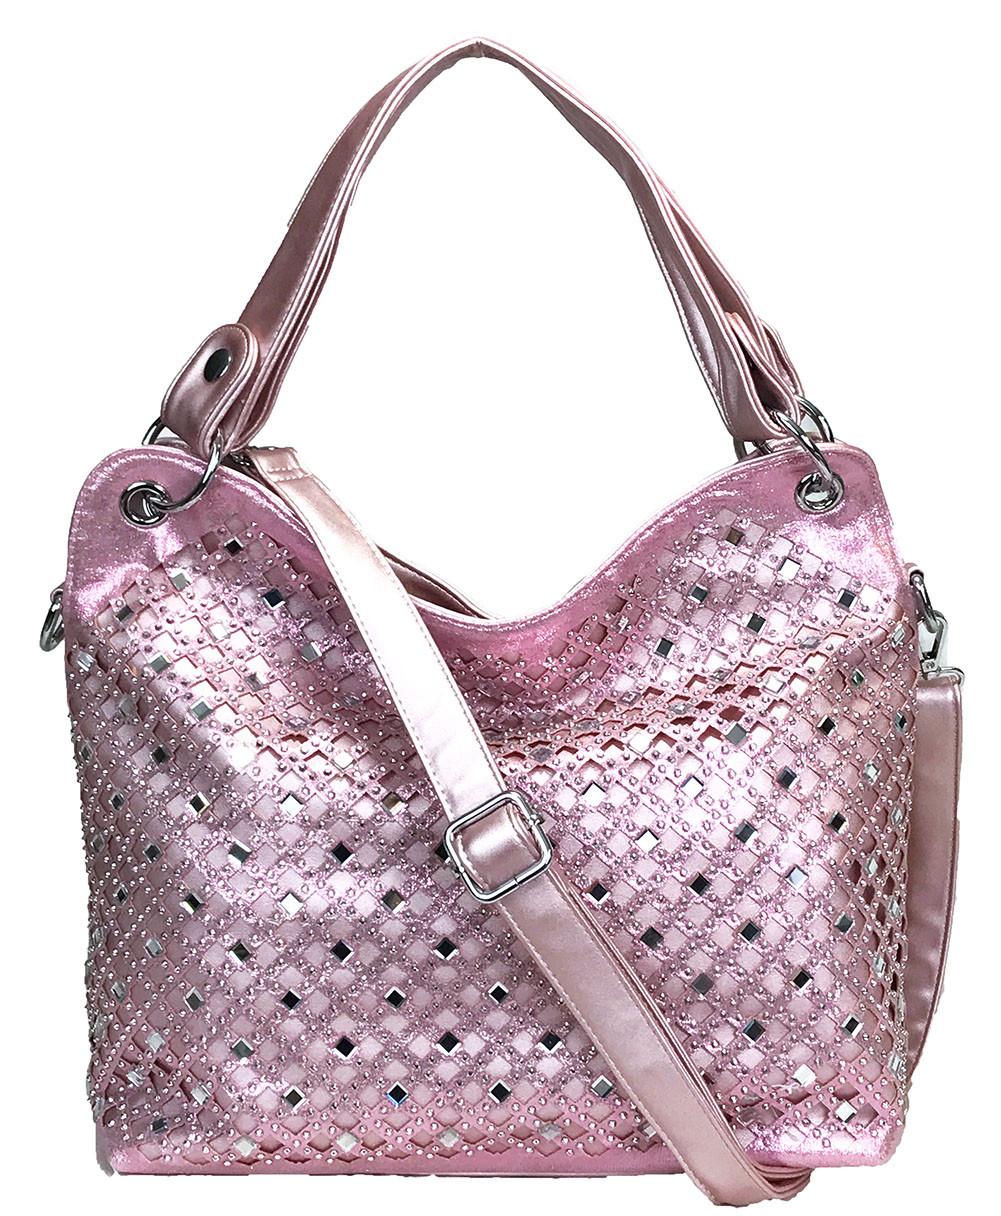 Finders Key Purse 01B-402 Pink Ribbons Bling